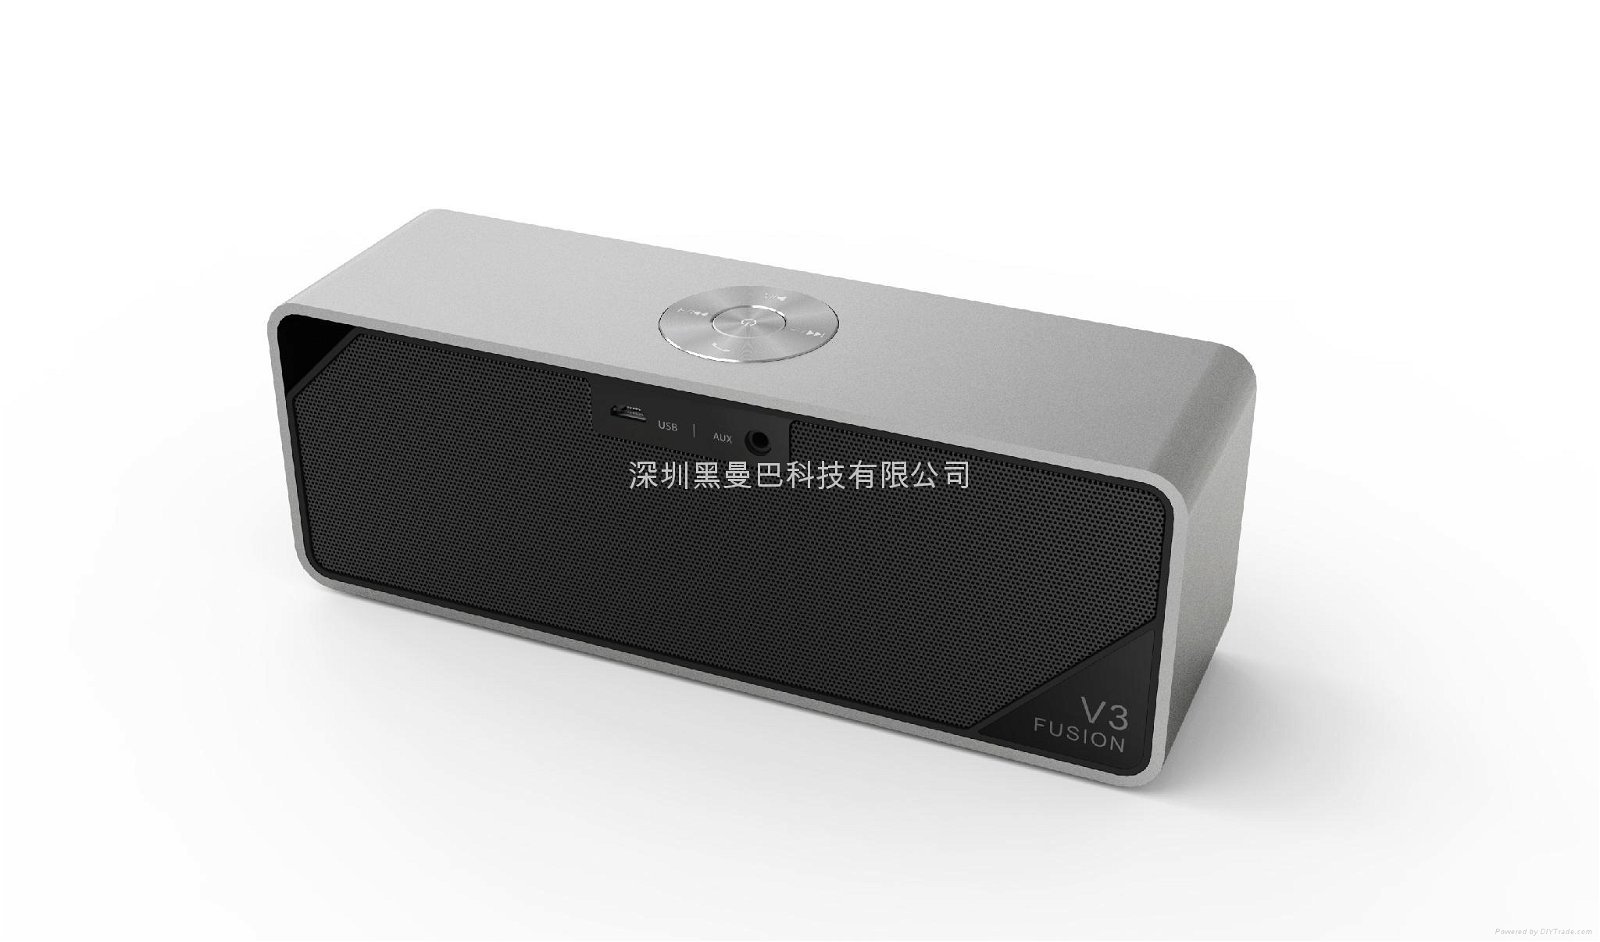 The Best Portable BT Speaker Wireless Bluetooth Speaker Stereo with NFC